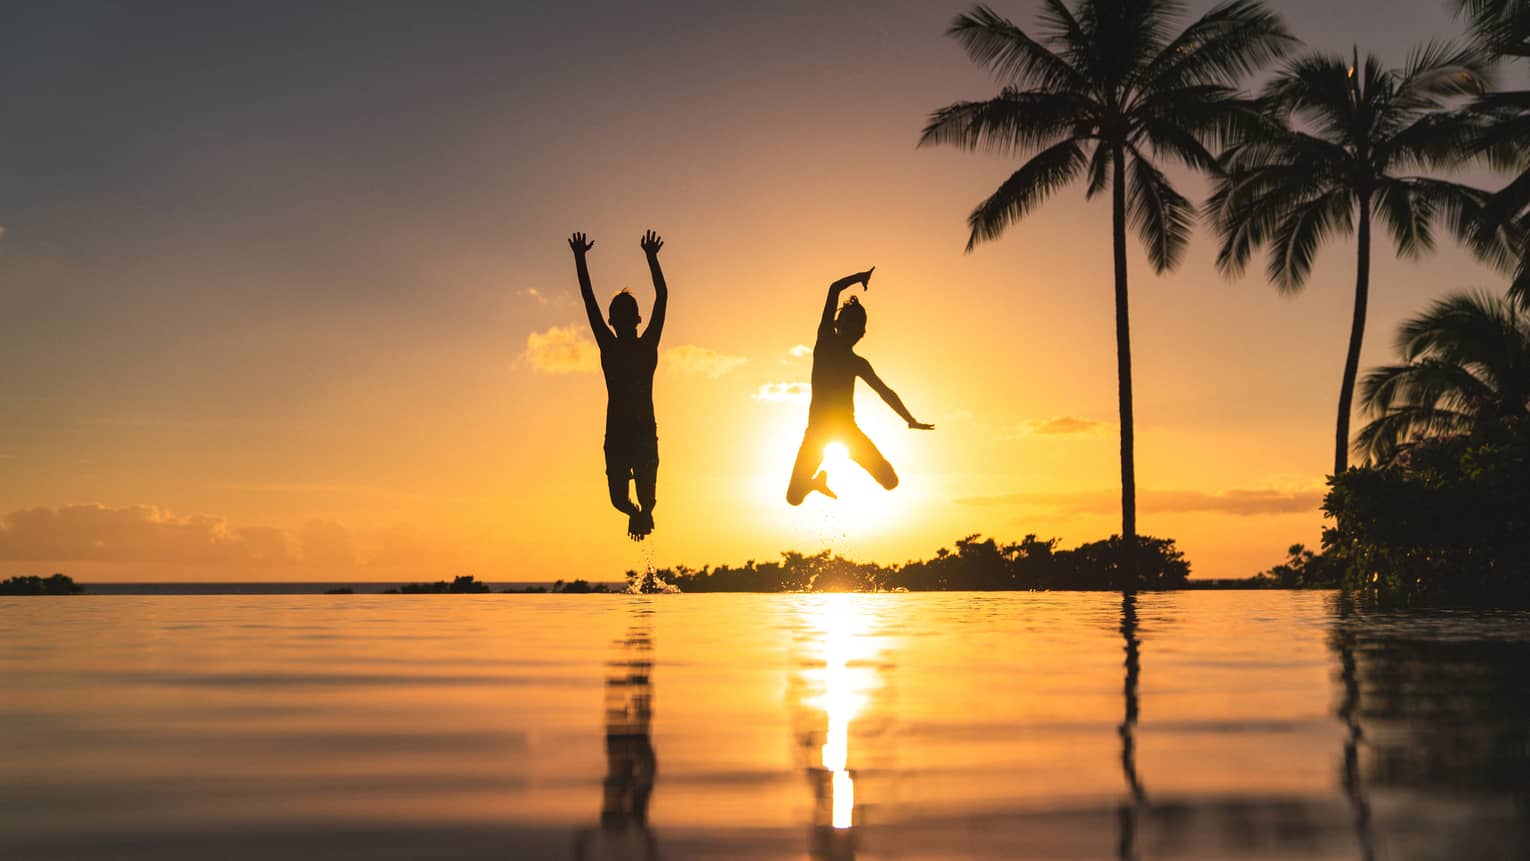 Silhouette of two children jumping above the water, sunset and palm trees in background 